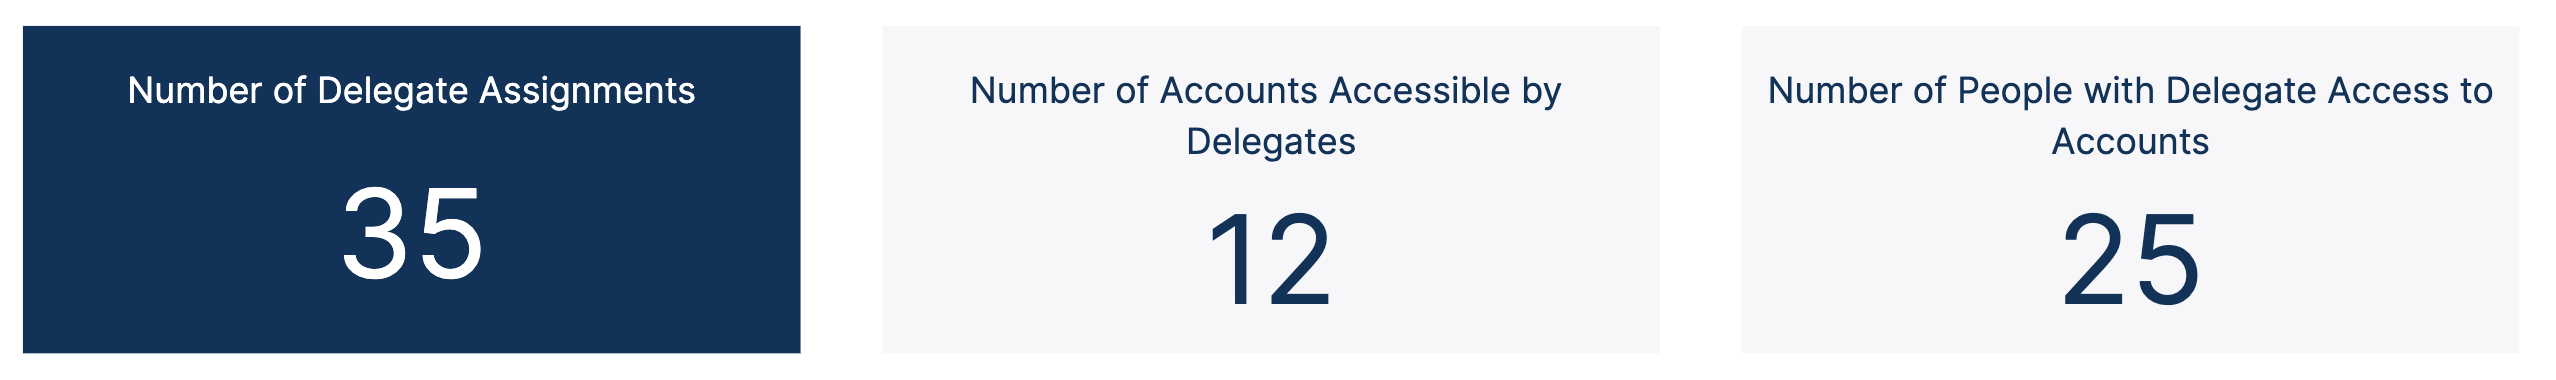 G-Delegate_Access_Count.png